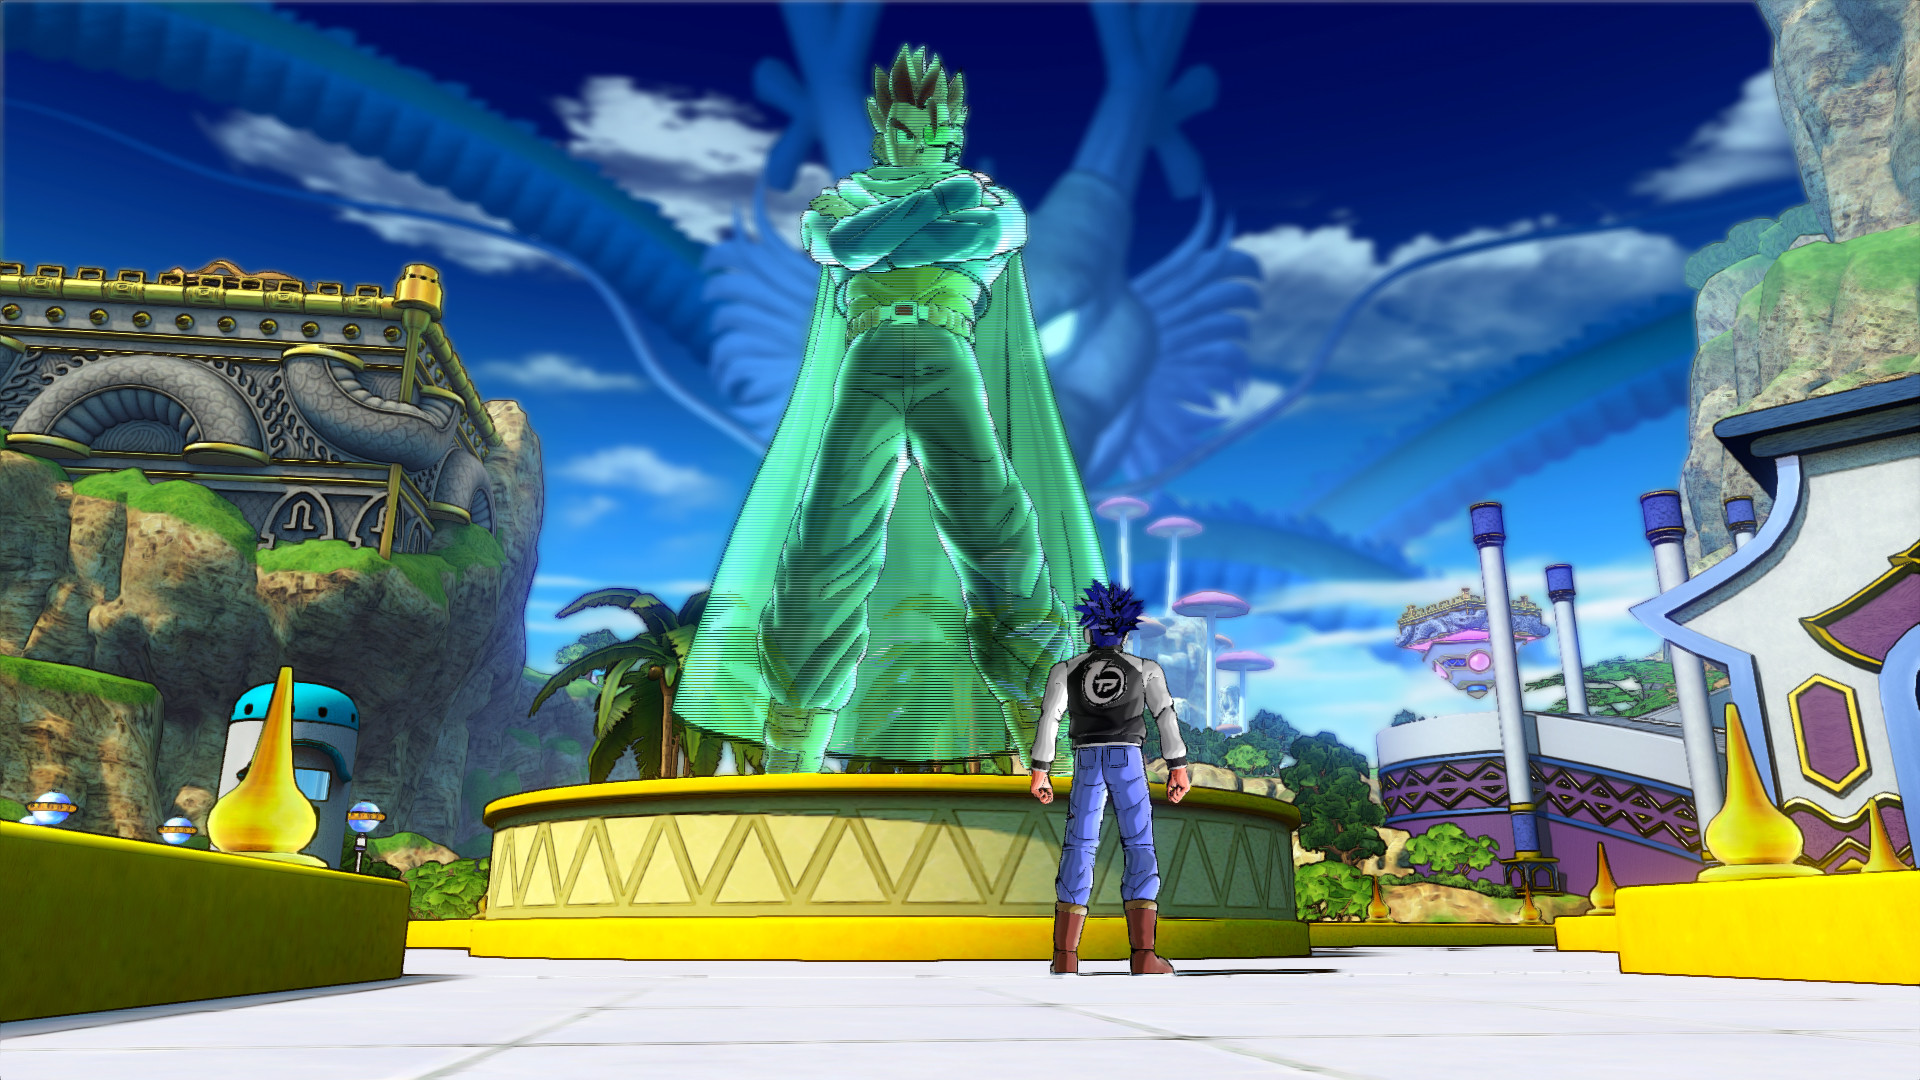 SLO on X: DRAGON BALL XENOVERSE 3 - New Mod Project 2022 https